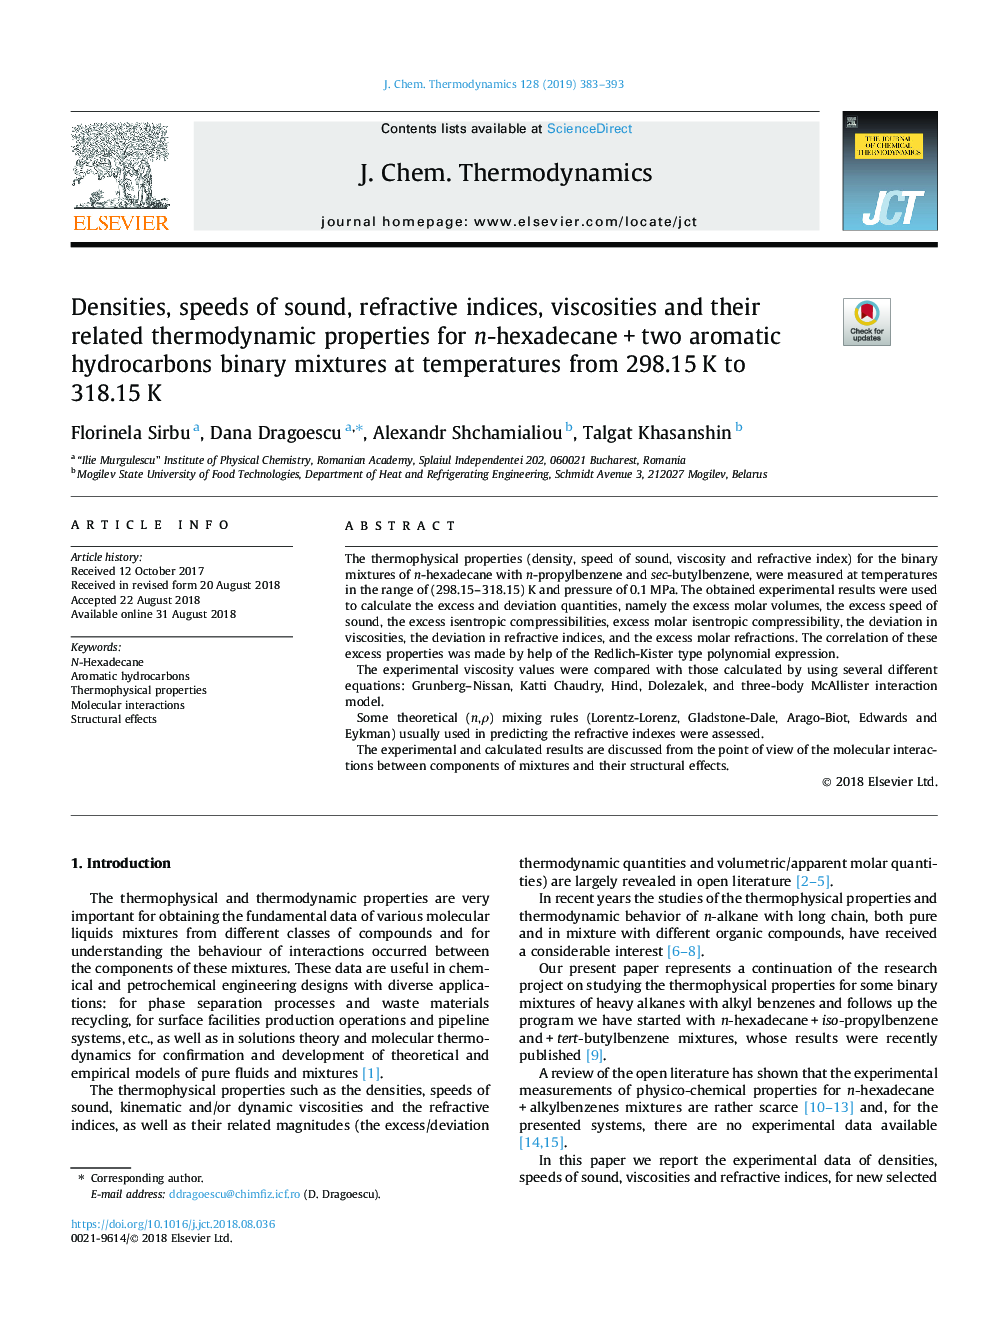 Densities, speeds of sound, refractive indices, viscosities and their related thermodynamic properties for n-hexadecaneâ¯+â¯two aromatic hydrocarbons binary mixtures at temperatures from 298.15â¯K to 318.15â¯K